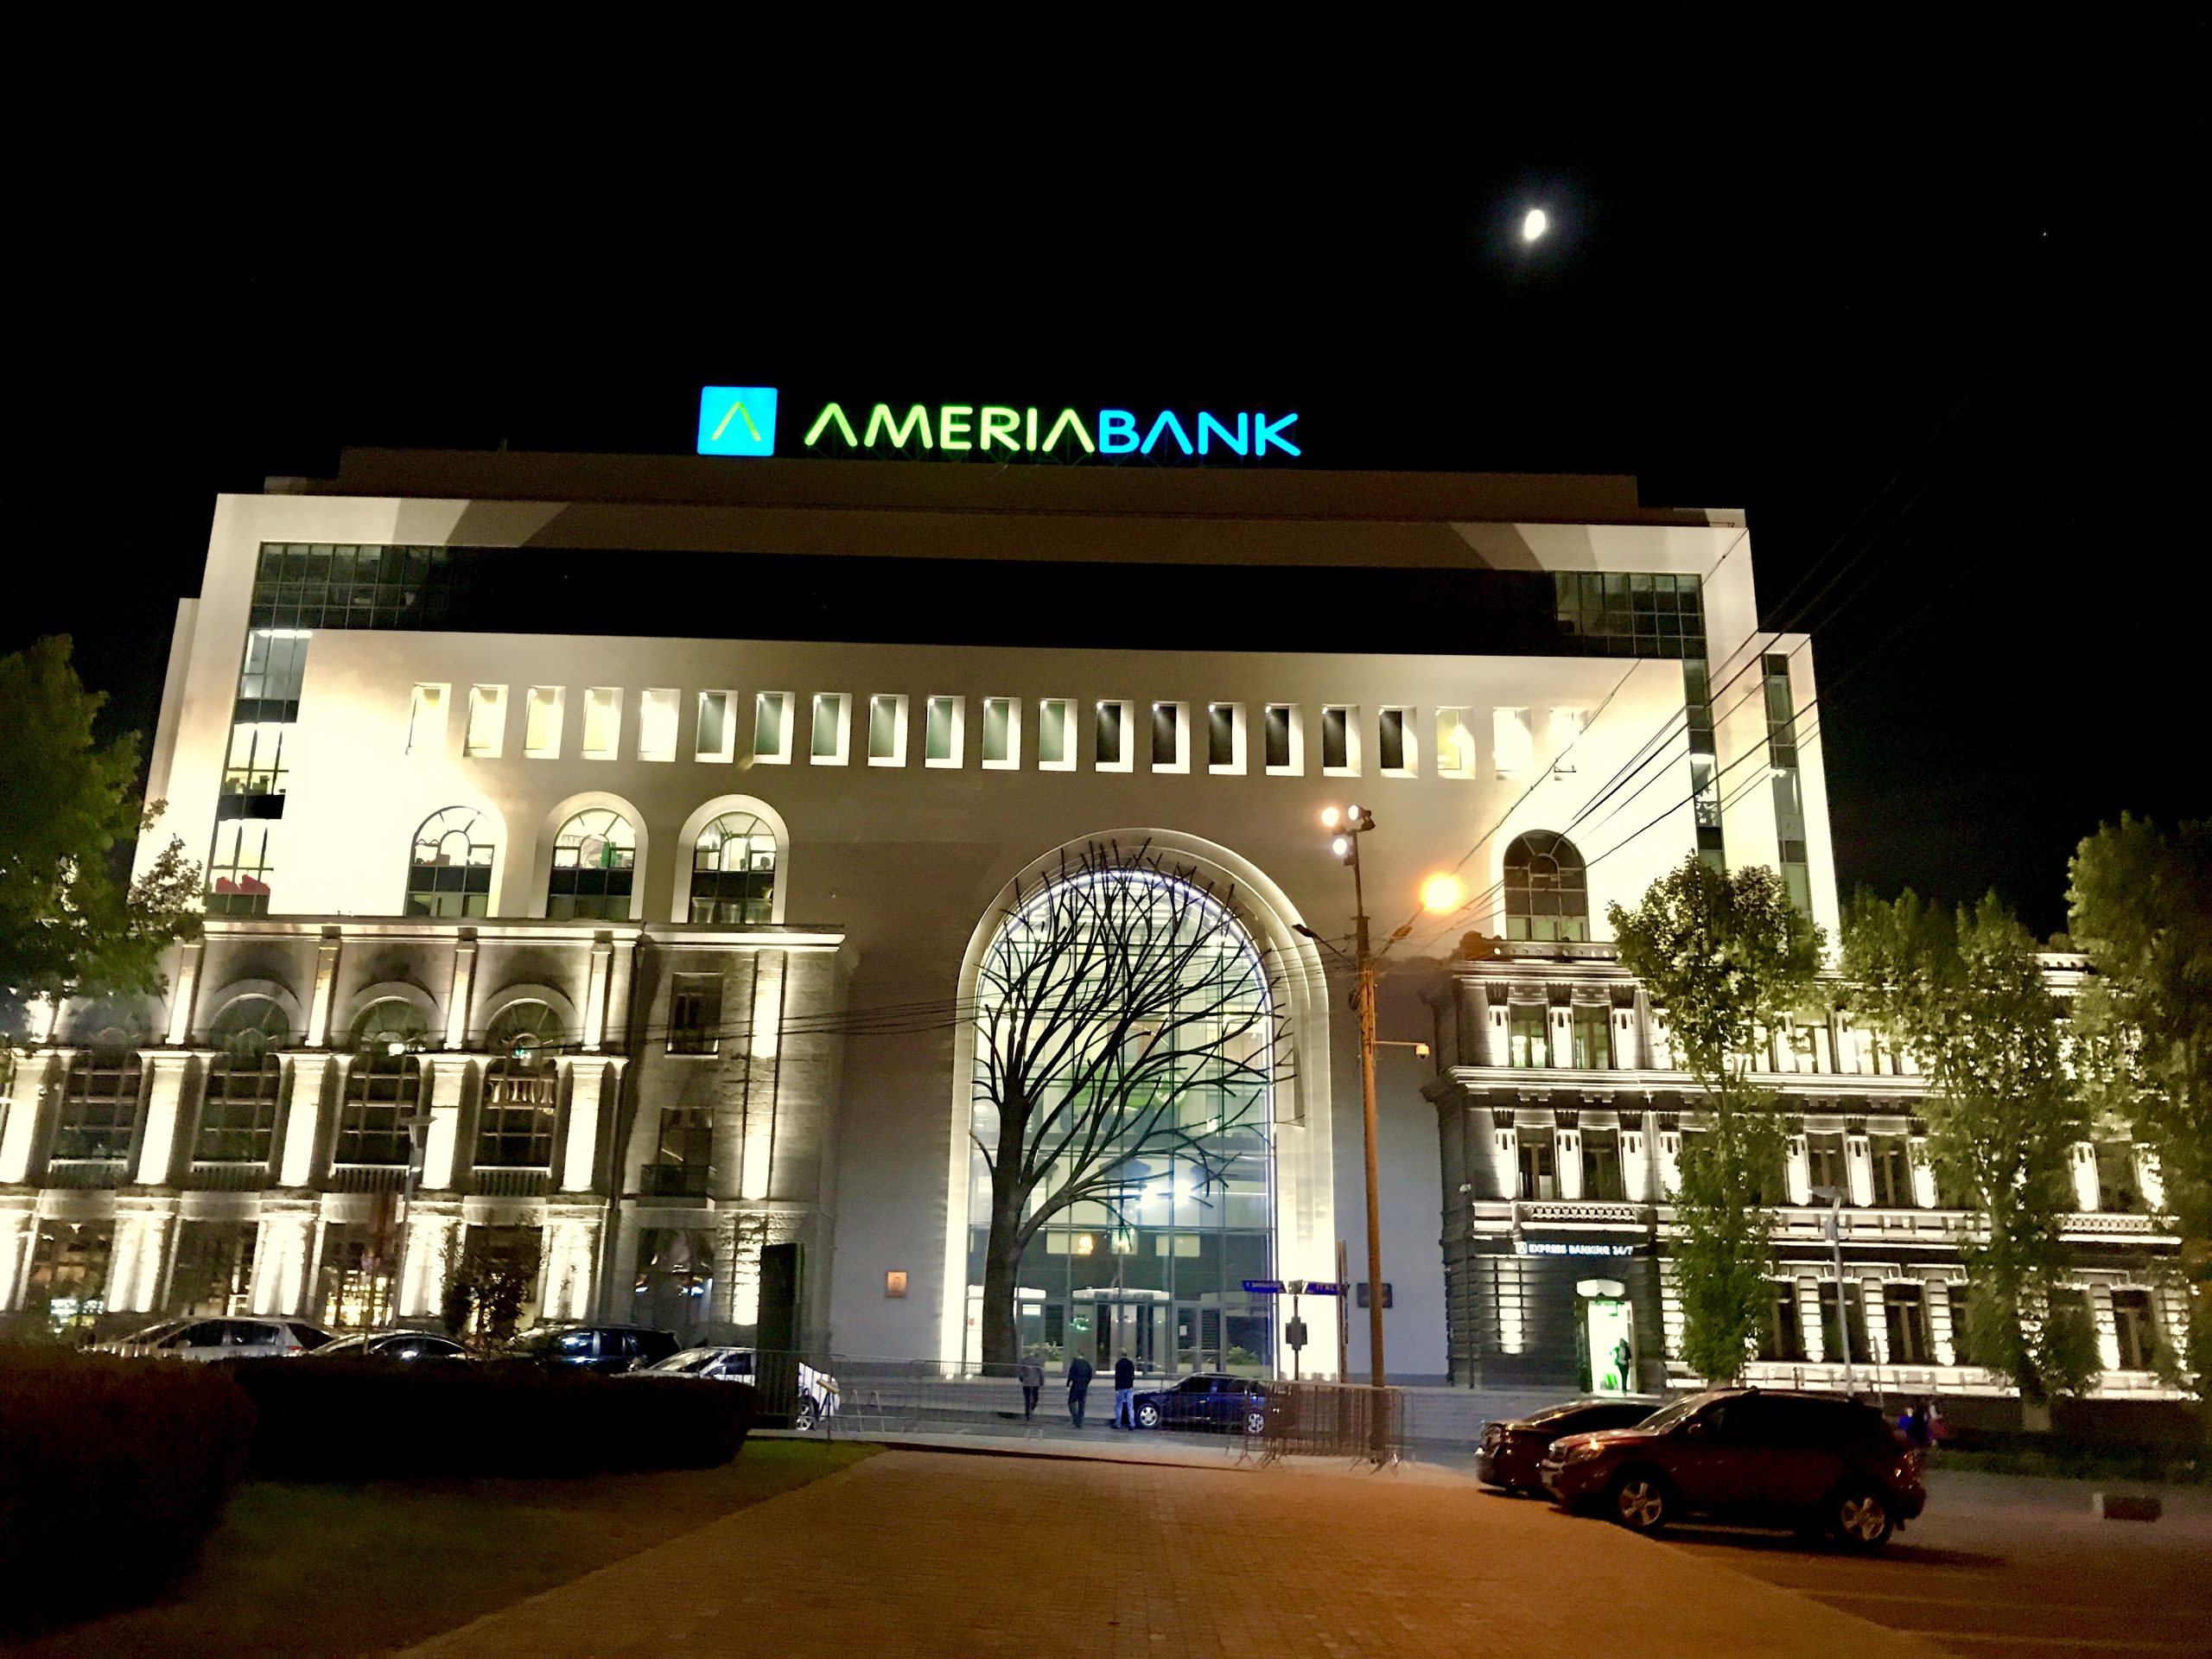 Ameriabank is being sold